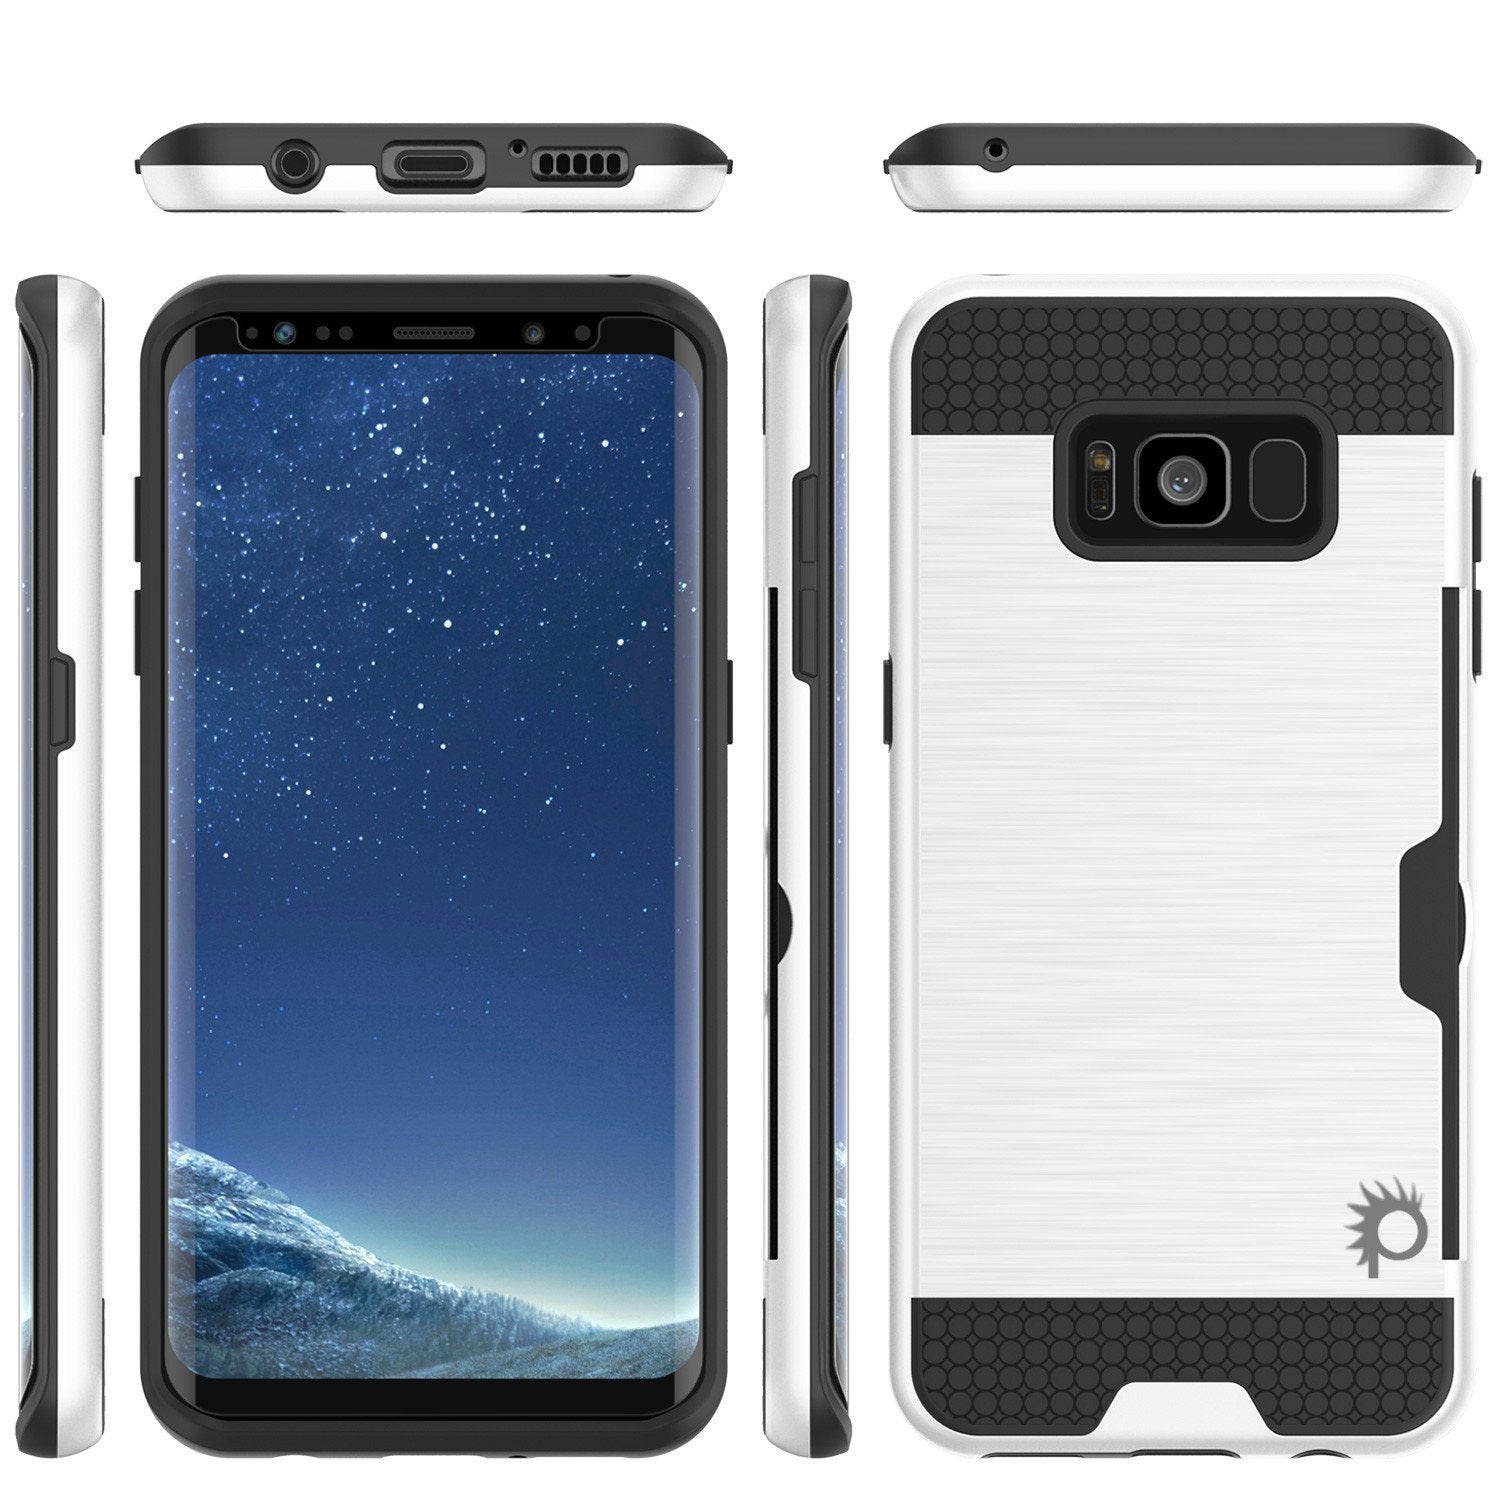 Galaxy S8 Case, PUNKcase [SLOT Series] Dual-Layer Armor Cover w/Integrated Anti-Shock System, Credit Card Slot & Screen Protector [White]